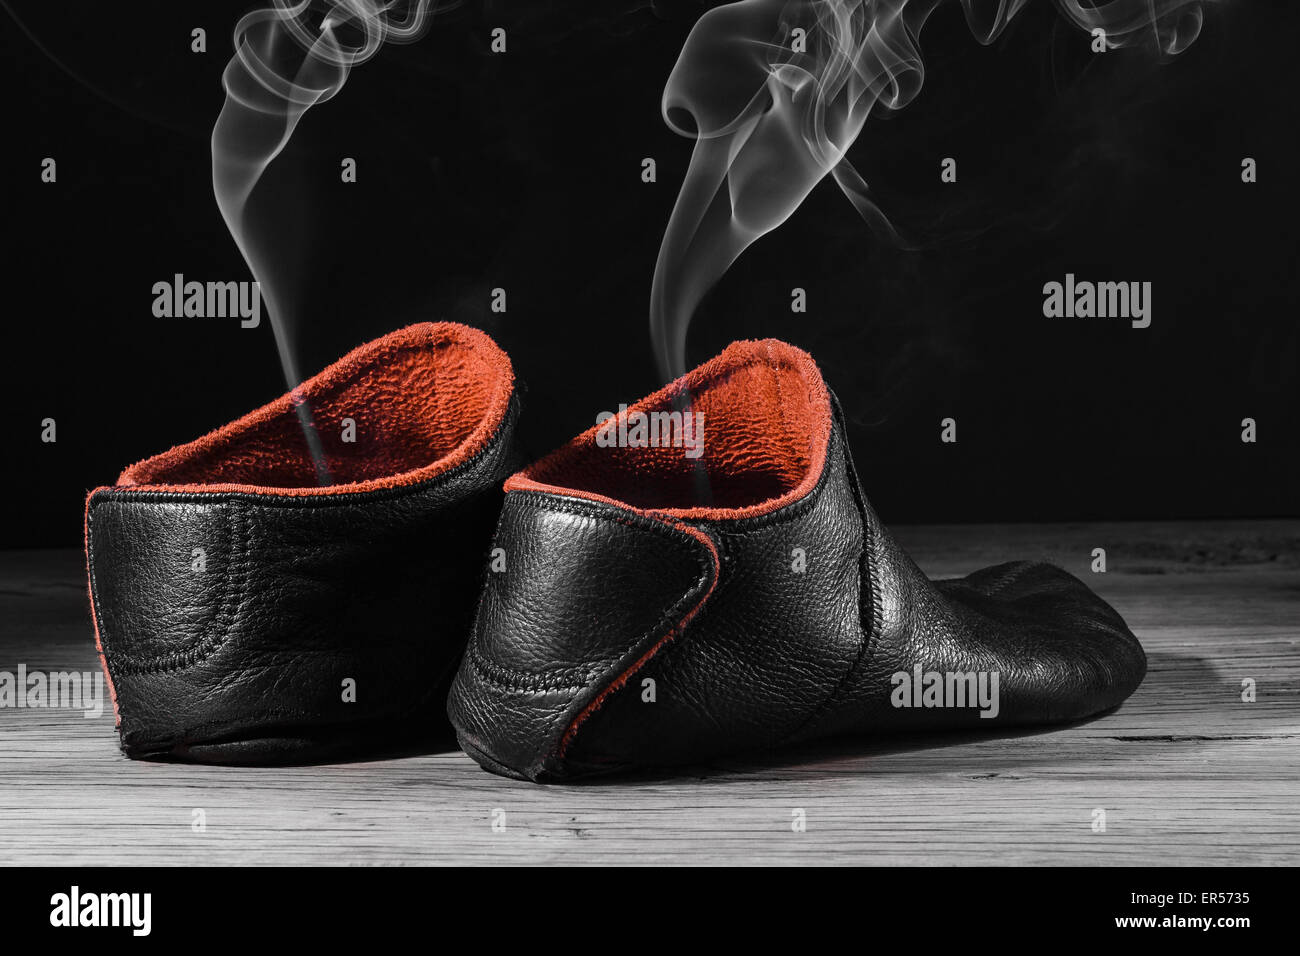 Empty slipper shoe design with smoke rise. Concept speed, smell, empty, leave. On black background with creative light. Stock Photo